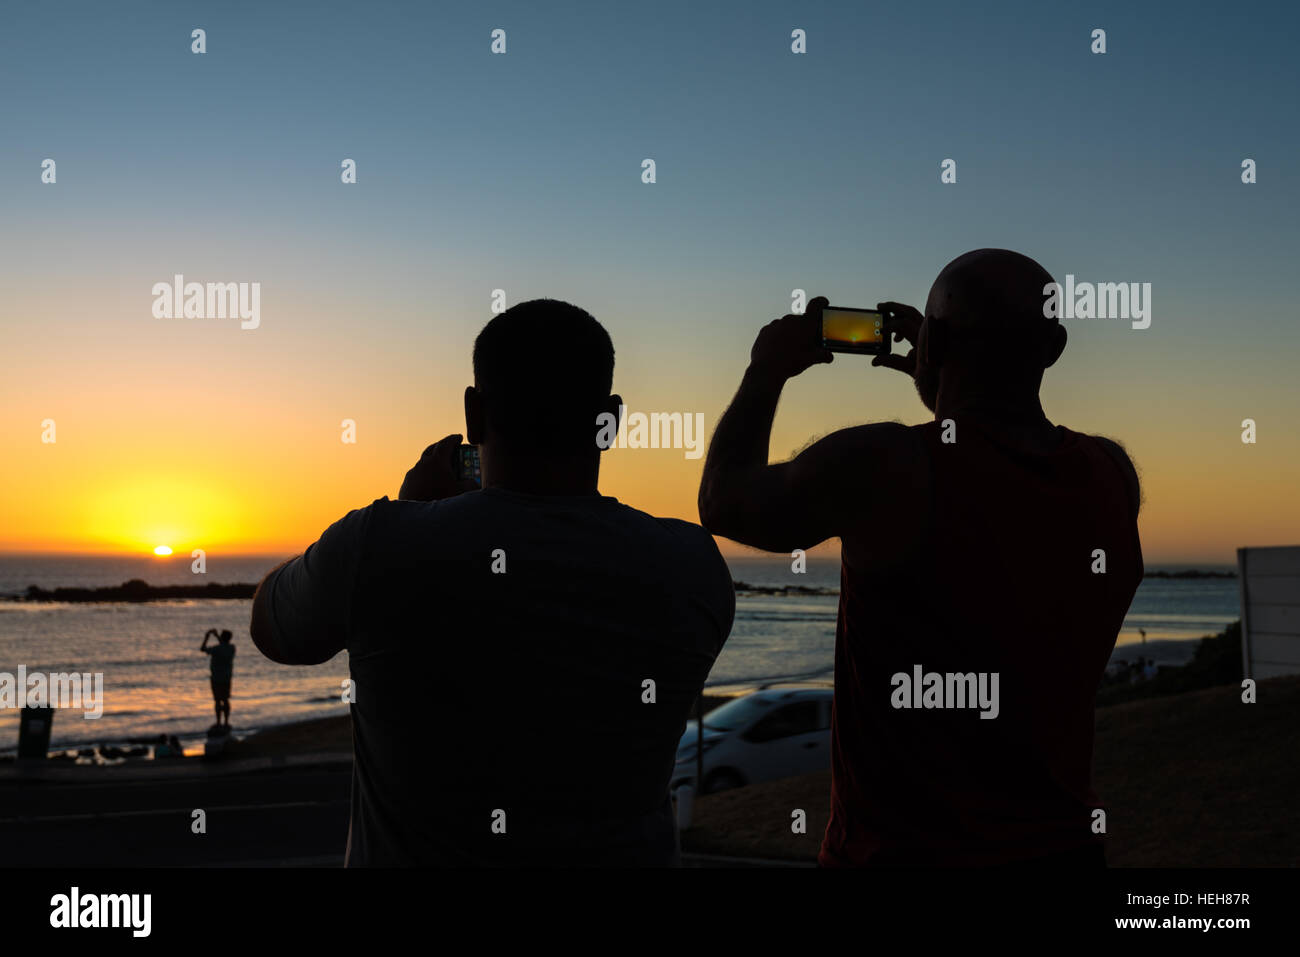 People taking photos of a sundown with their smartphones Stock Photo